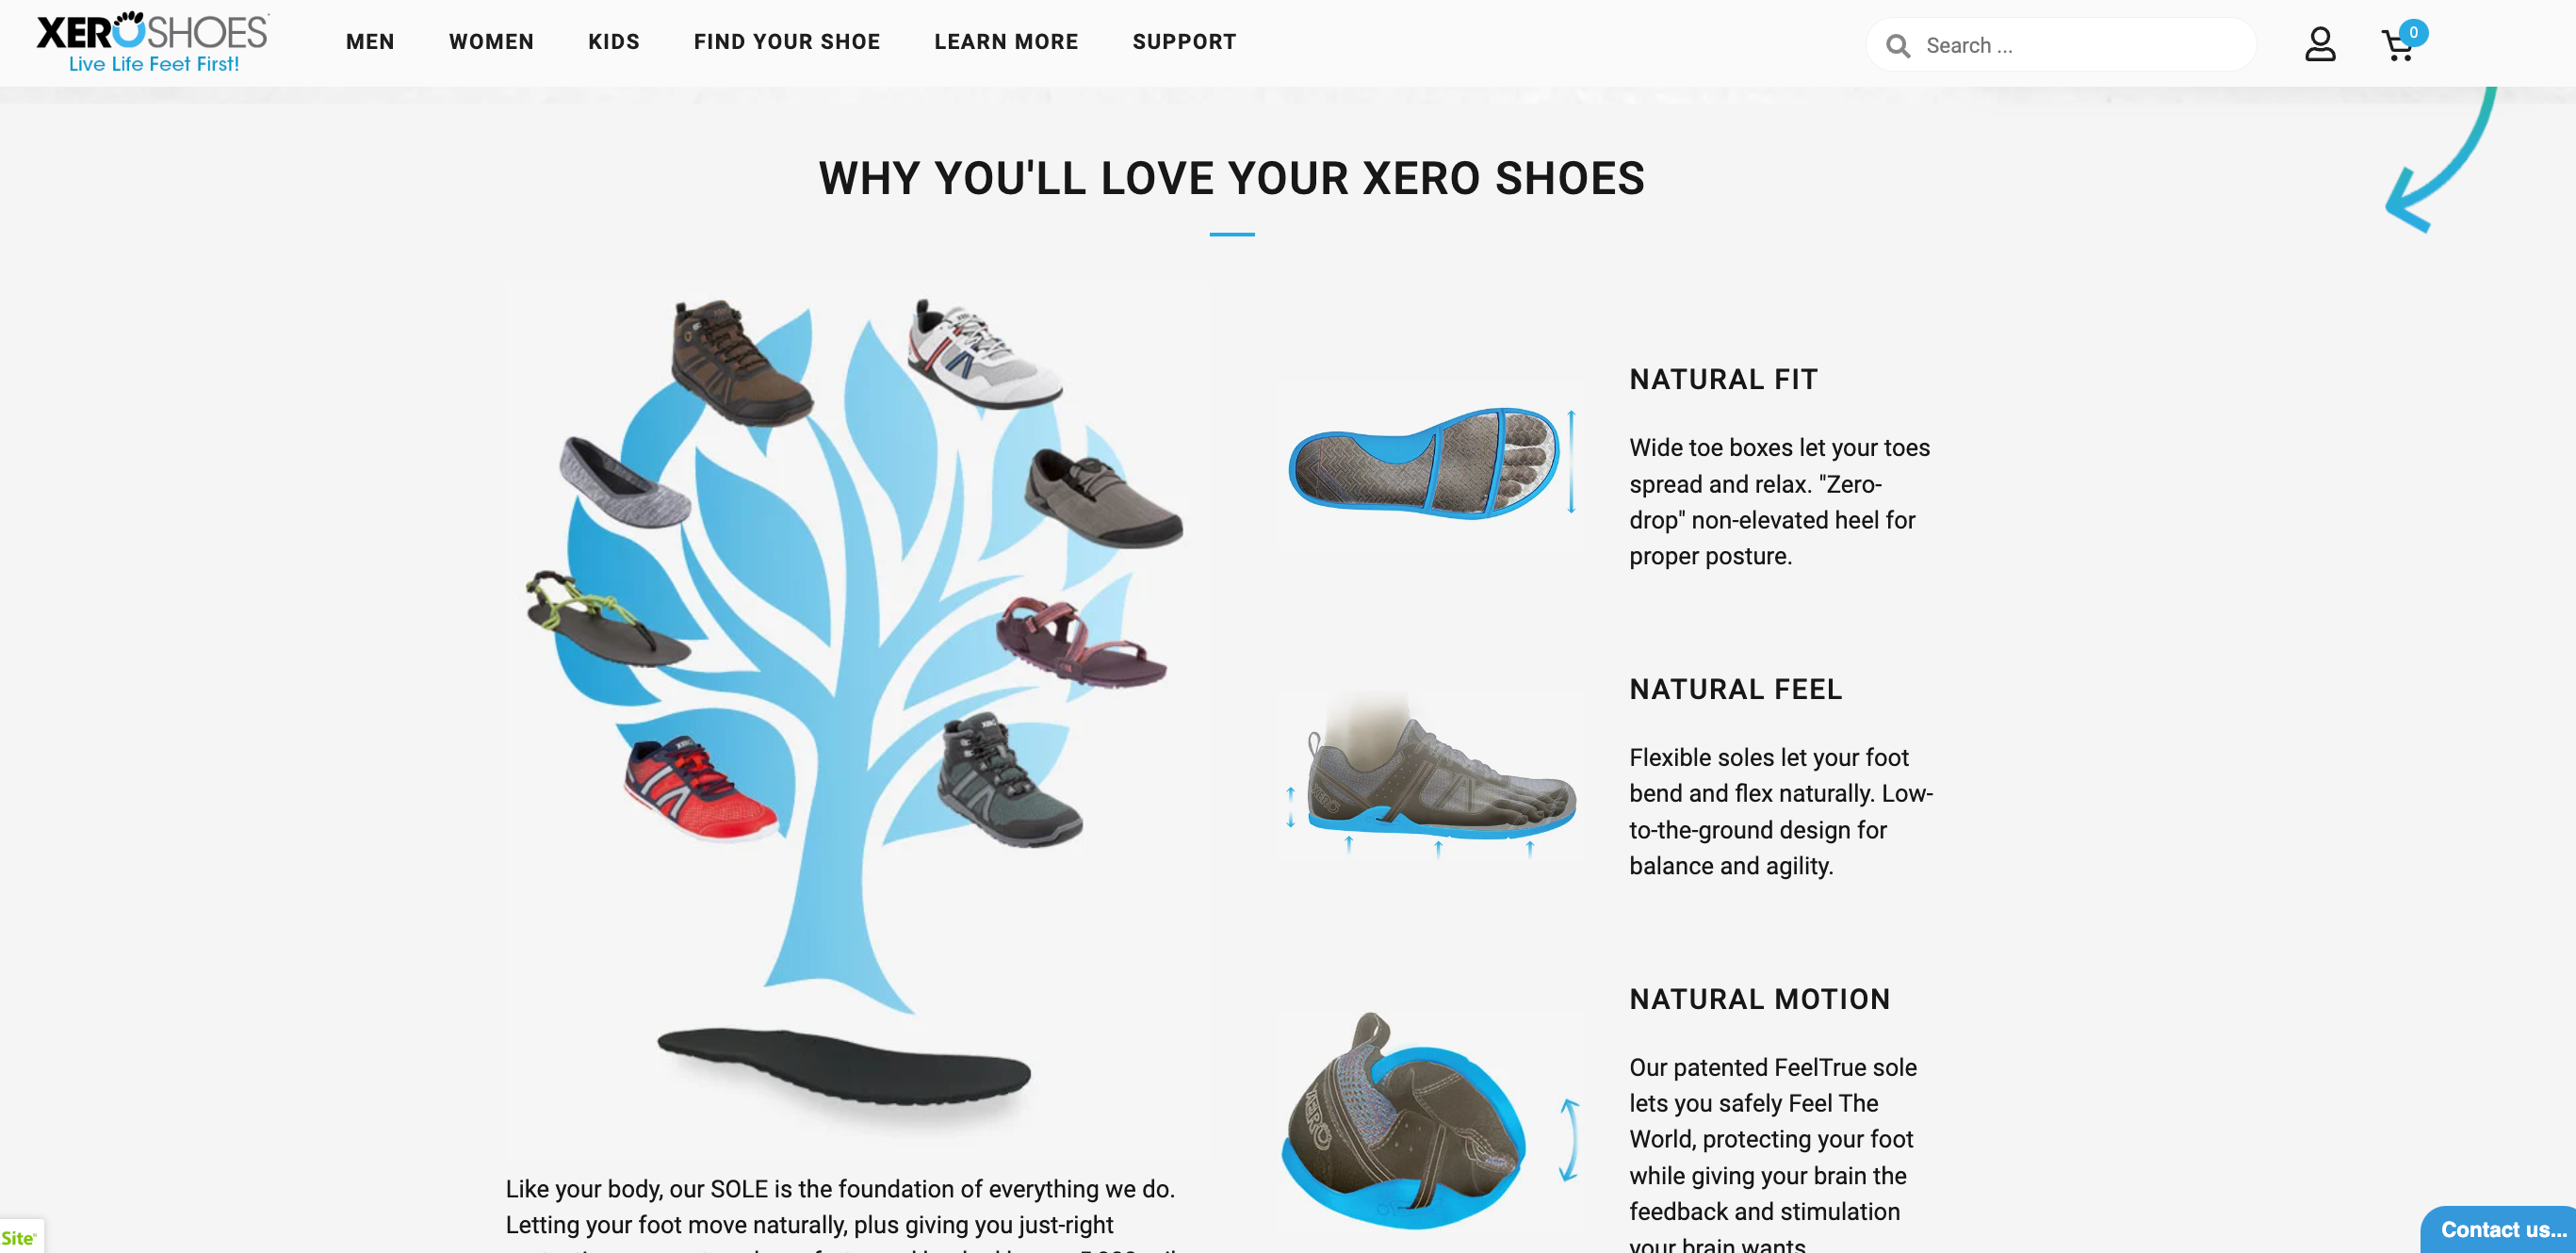 Best-Barefoot-Shoes-and-Sandals-for-Running-Hiking-Walking-Xero-Shoes